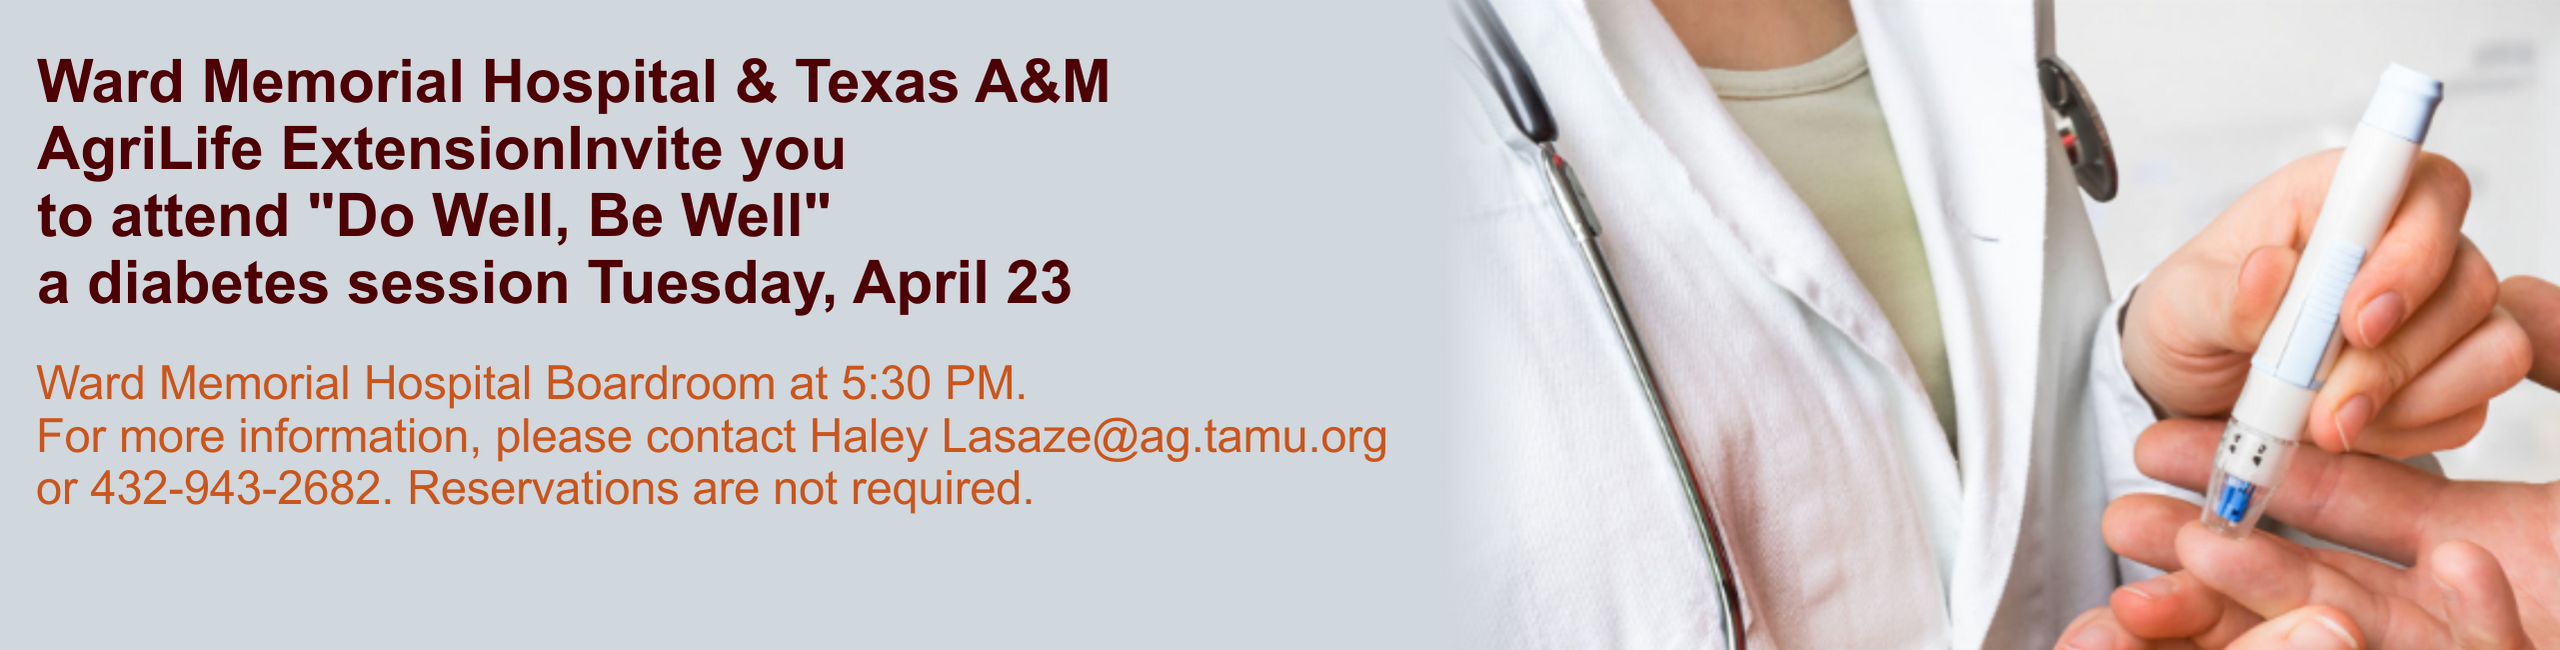 Ward Memorial Hospital & Texas A&M AgriLife ExtensionInvite you to attend "Do Well, Be Well" a diabetes session Tuesday, April 23

Ward Memorial Hospital Boardroom at 5:30 PM.
For more information, please contact Haley Lasaze@ag.tamu.org or (432)-94392682. Reservations are not required.